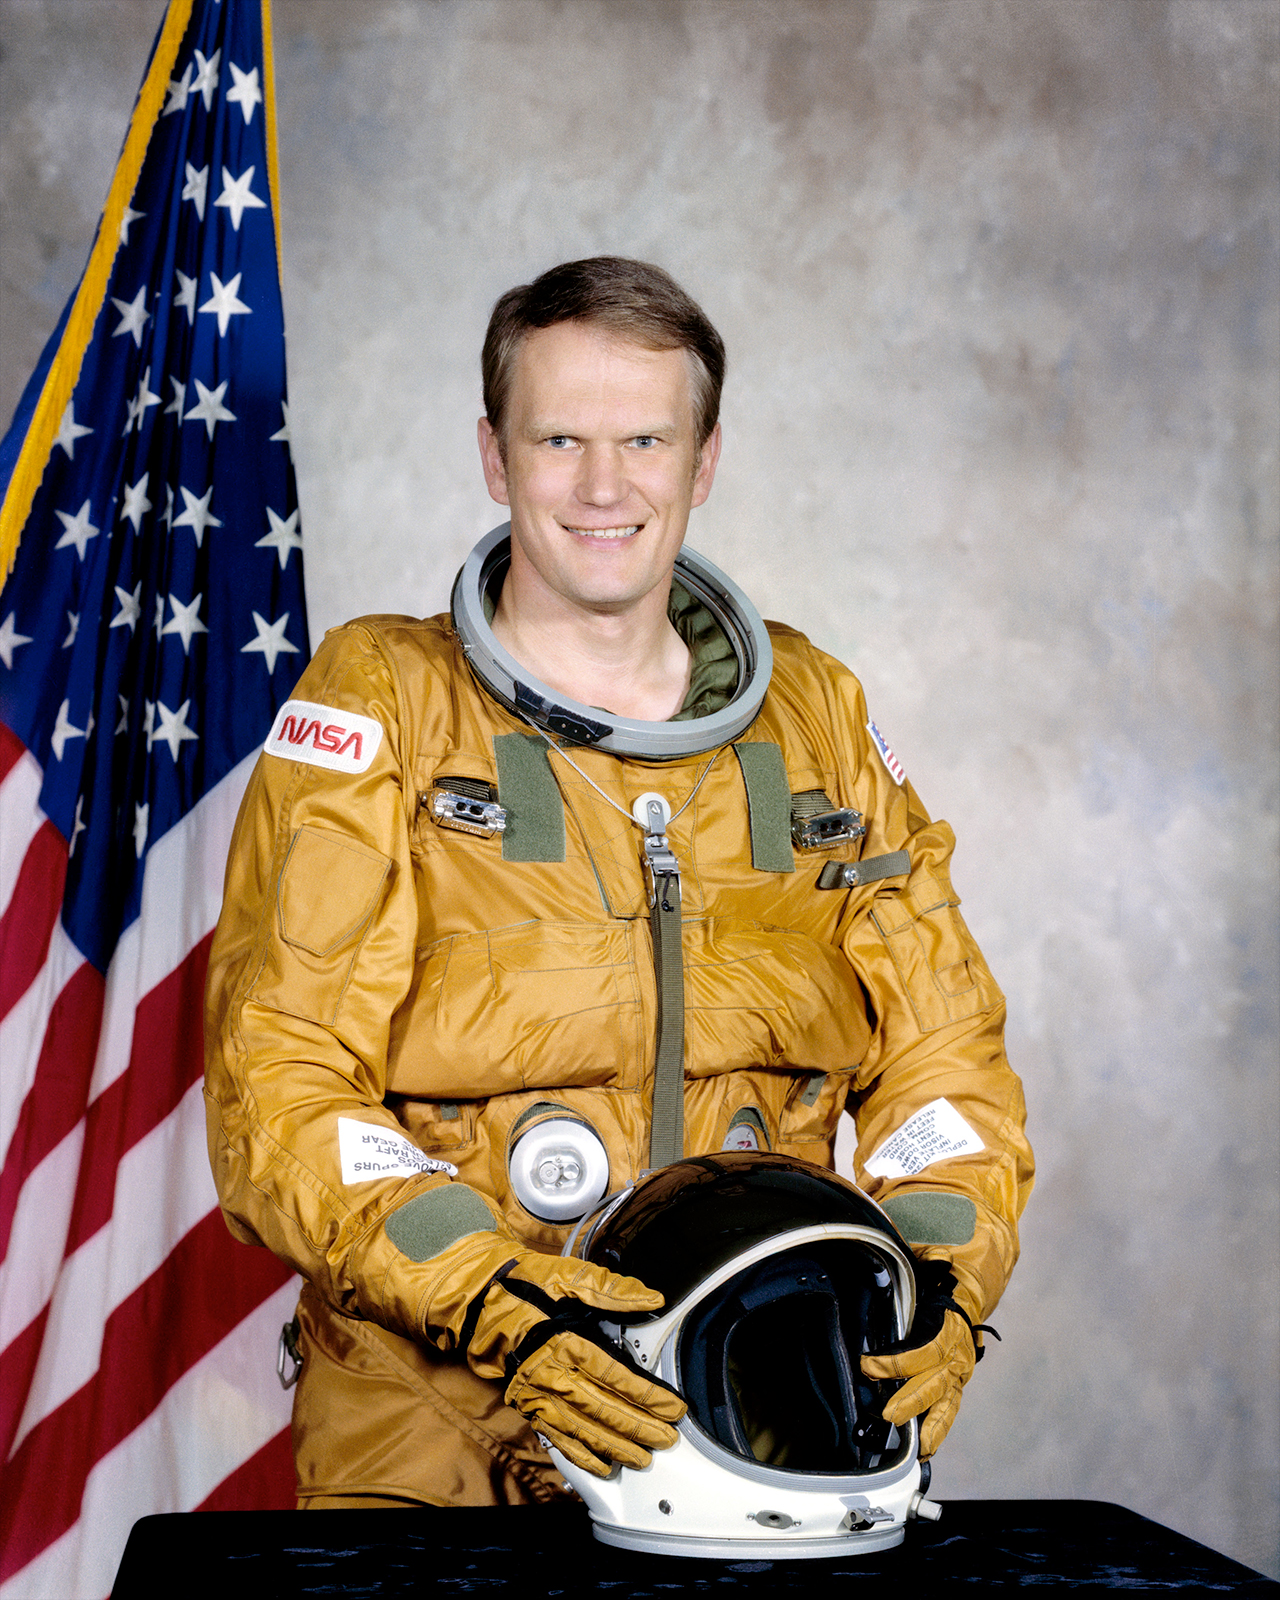 an astronaut in an orange flight suit poses in front of the American flag.